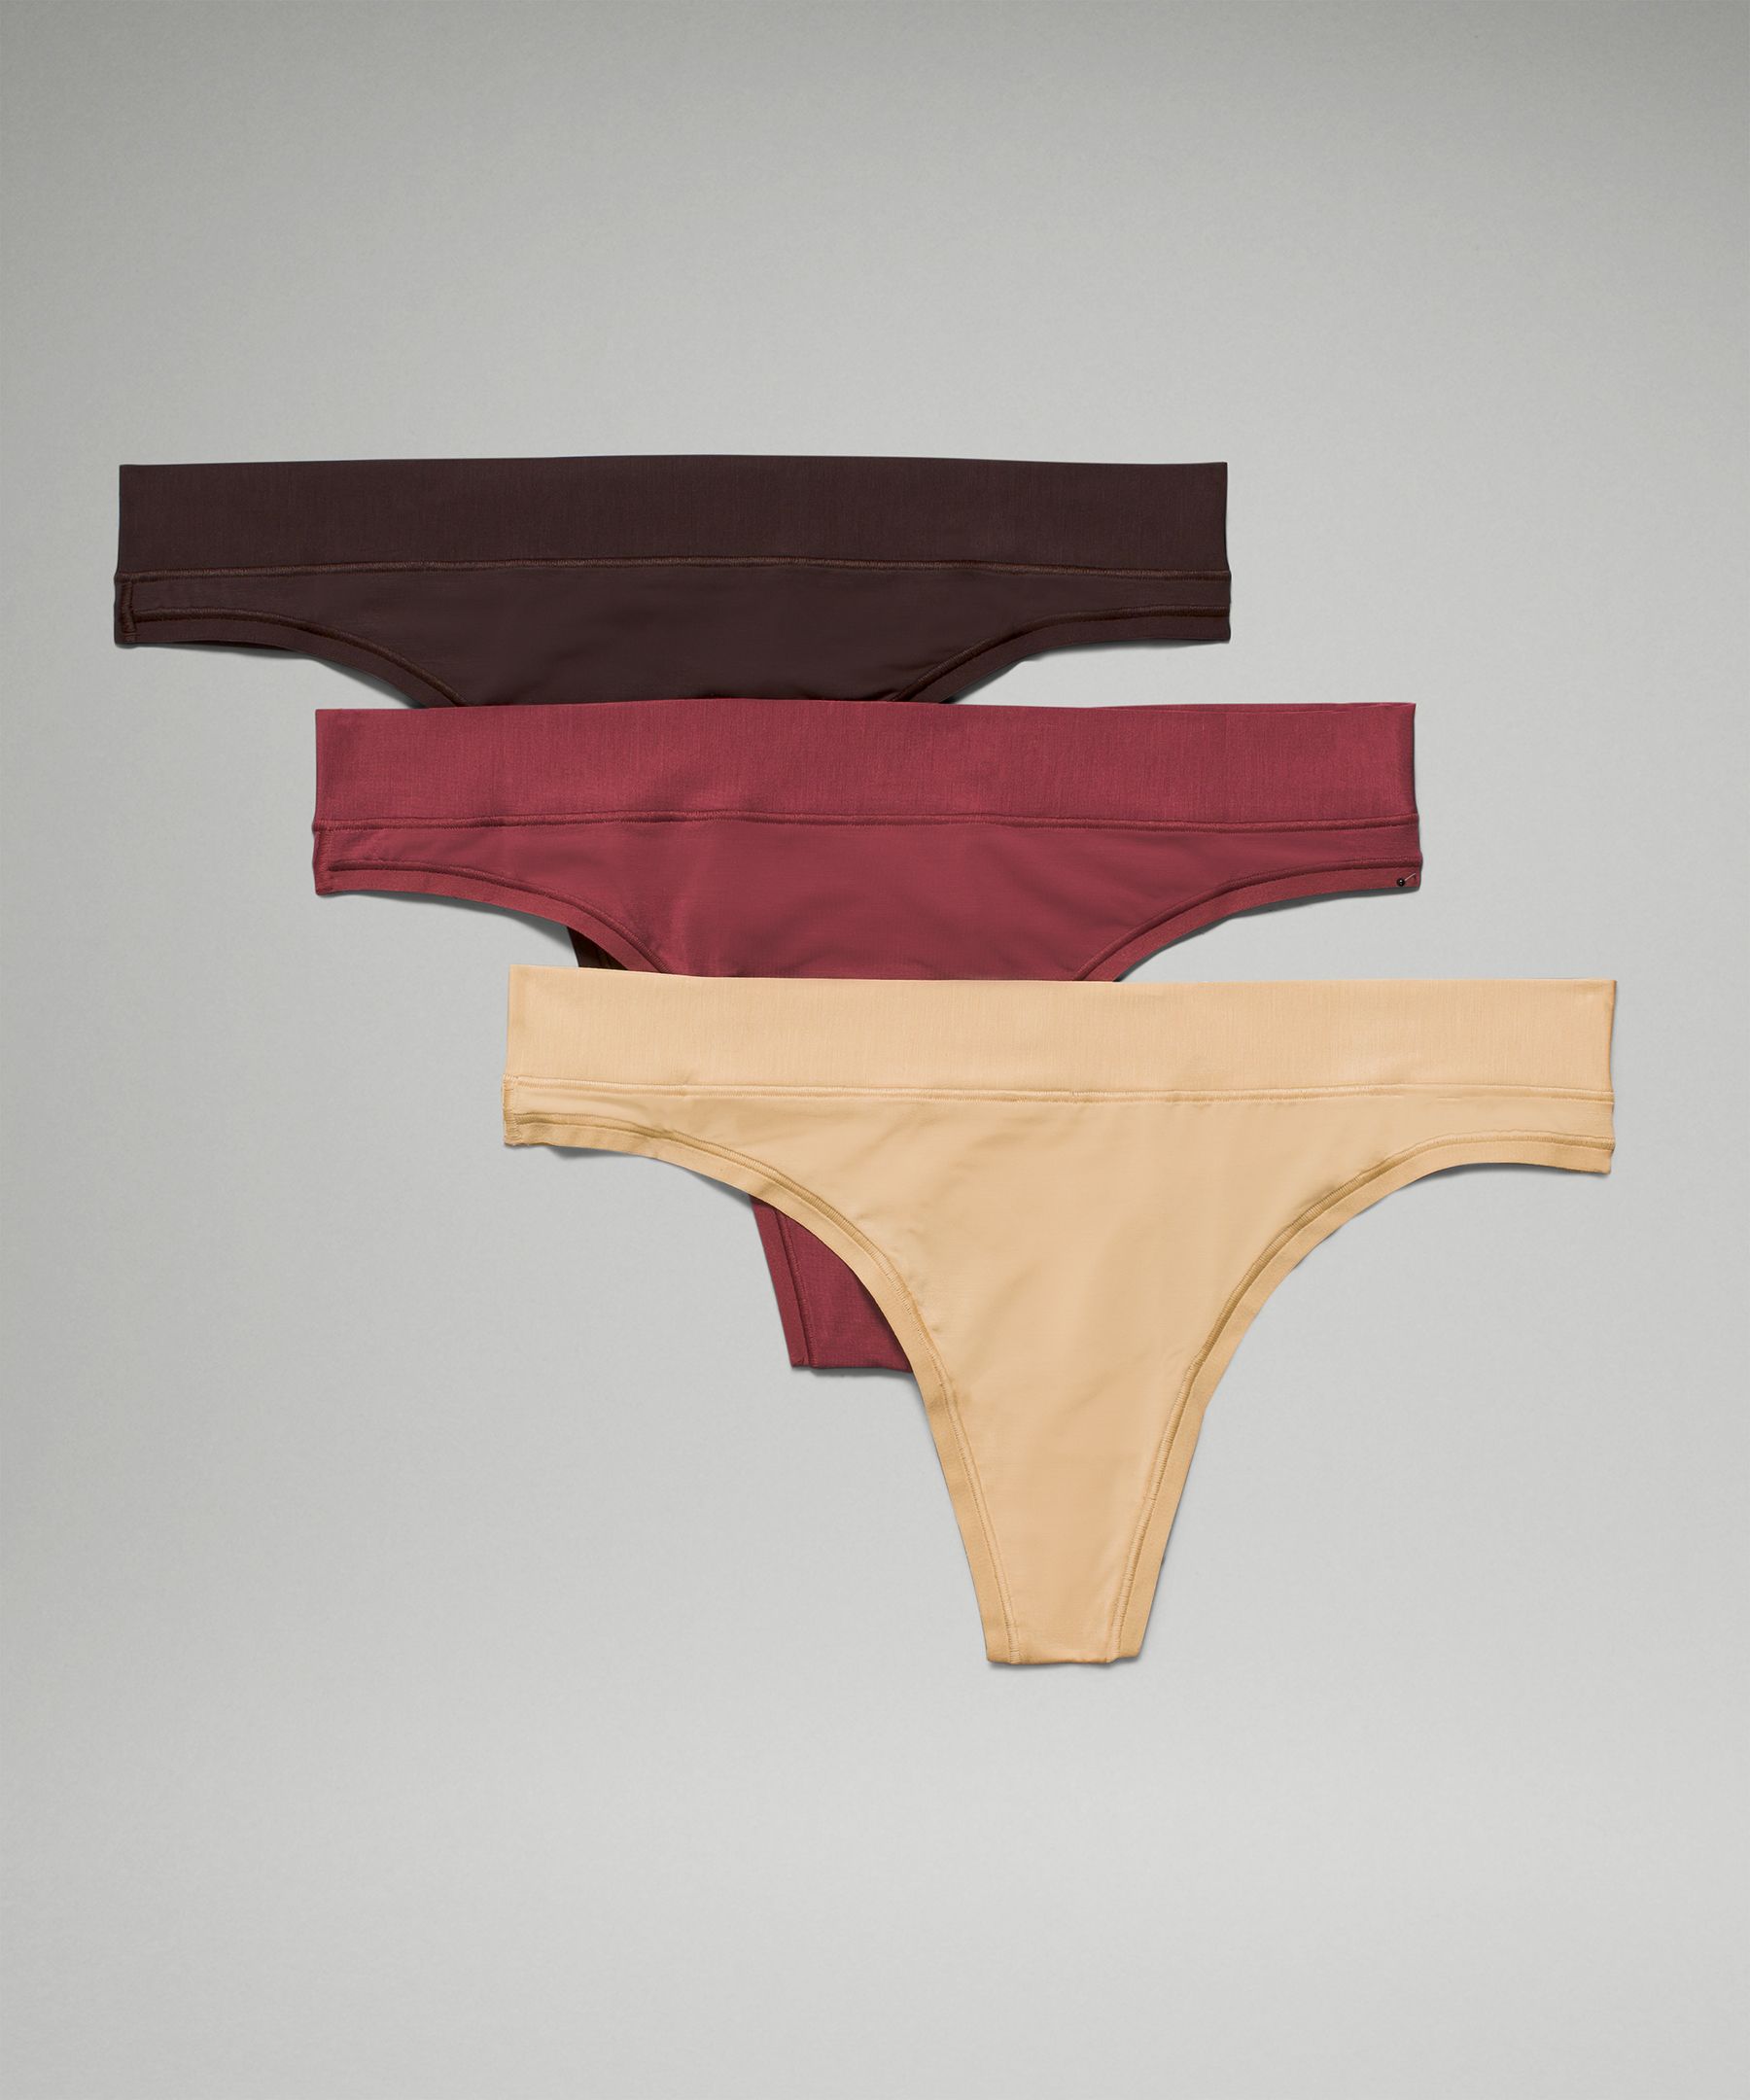 Lululemon Underease Mid-rise Thong Underwear 3 Pack In Mulled Wine/pecan Tan/french Press